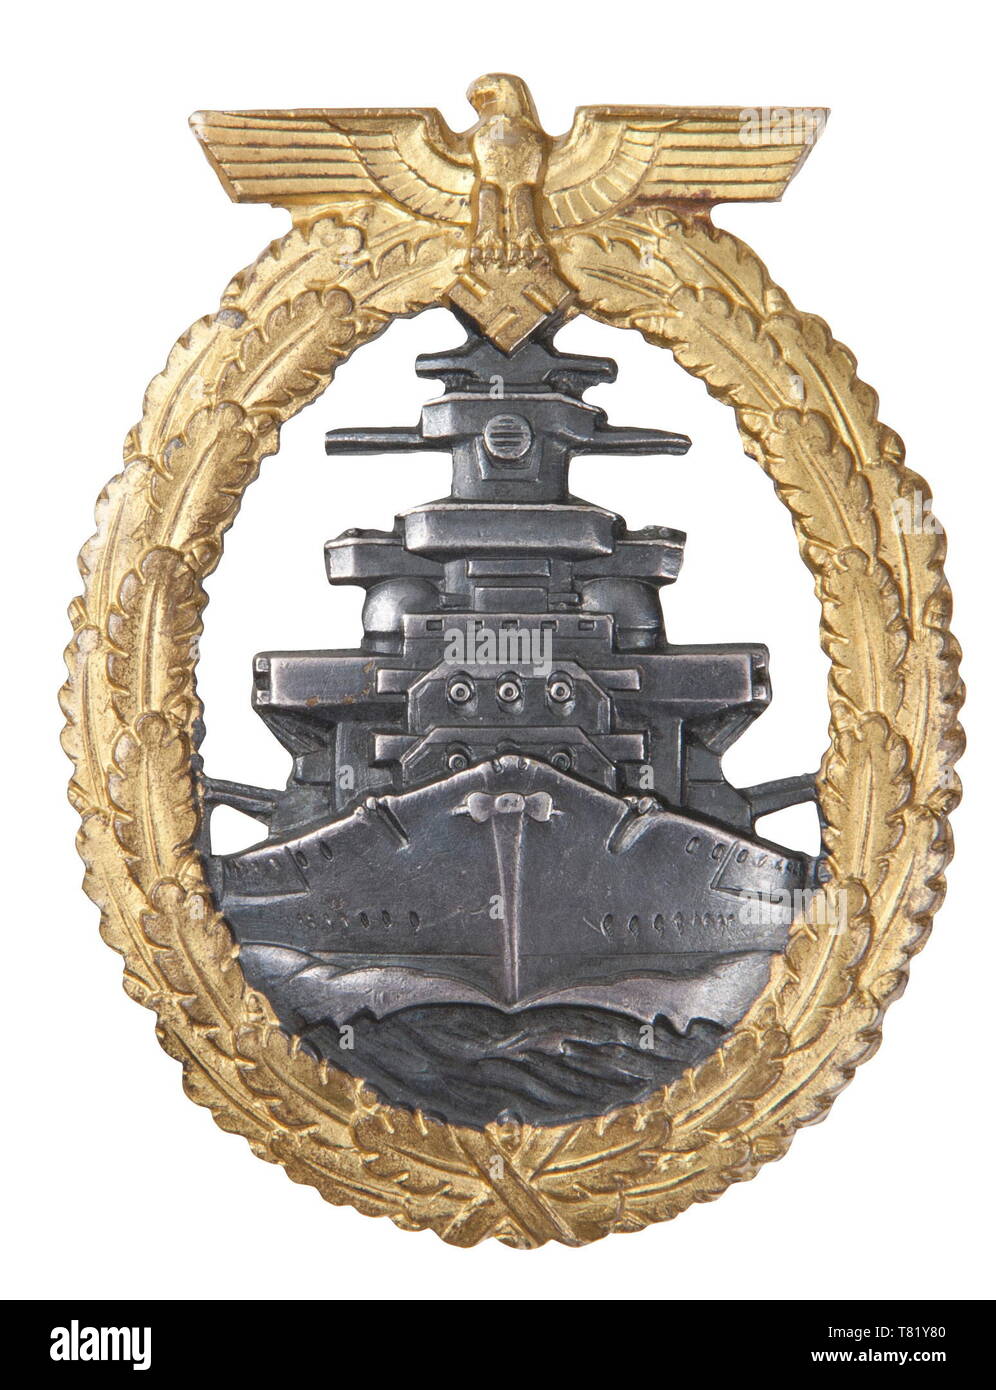 A High Seas Fleet War Badge Maker C. Schwerin u. Sohn. Early tombak example with raised trademark, barrel hinge and vertical tapered pin. USA-Los historic, historical, awards, award, German Reich, Third Reich, Nazi era, National Socialism, object, objects, stills, medal, decoration, medals, decorations, clipping, cut out, cut-out, cut-outs, honor, honour, National Socialist, Nazi, Nazi period, 20th century, Editorial-Use-Only Stock Photo